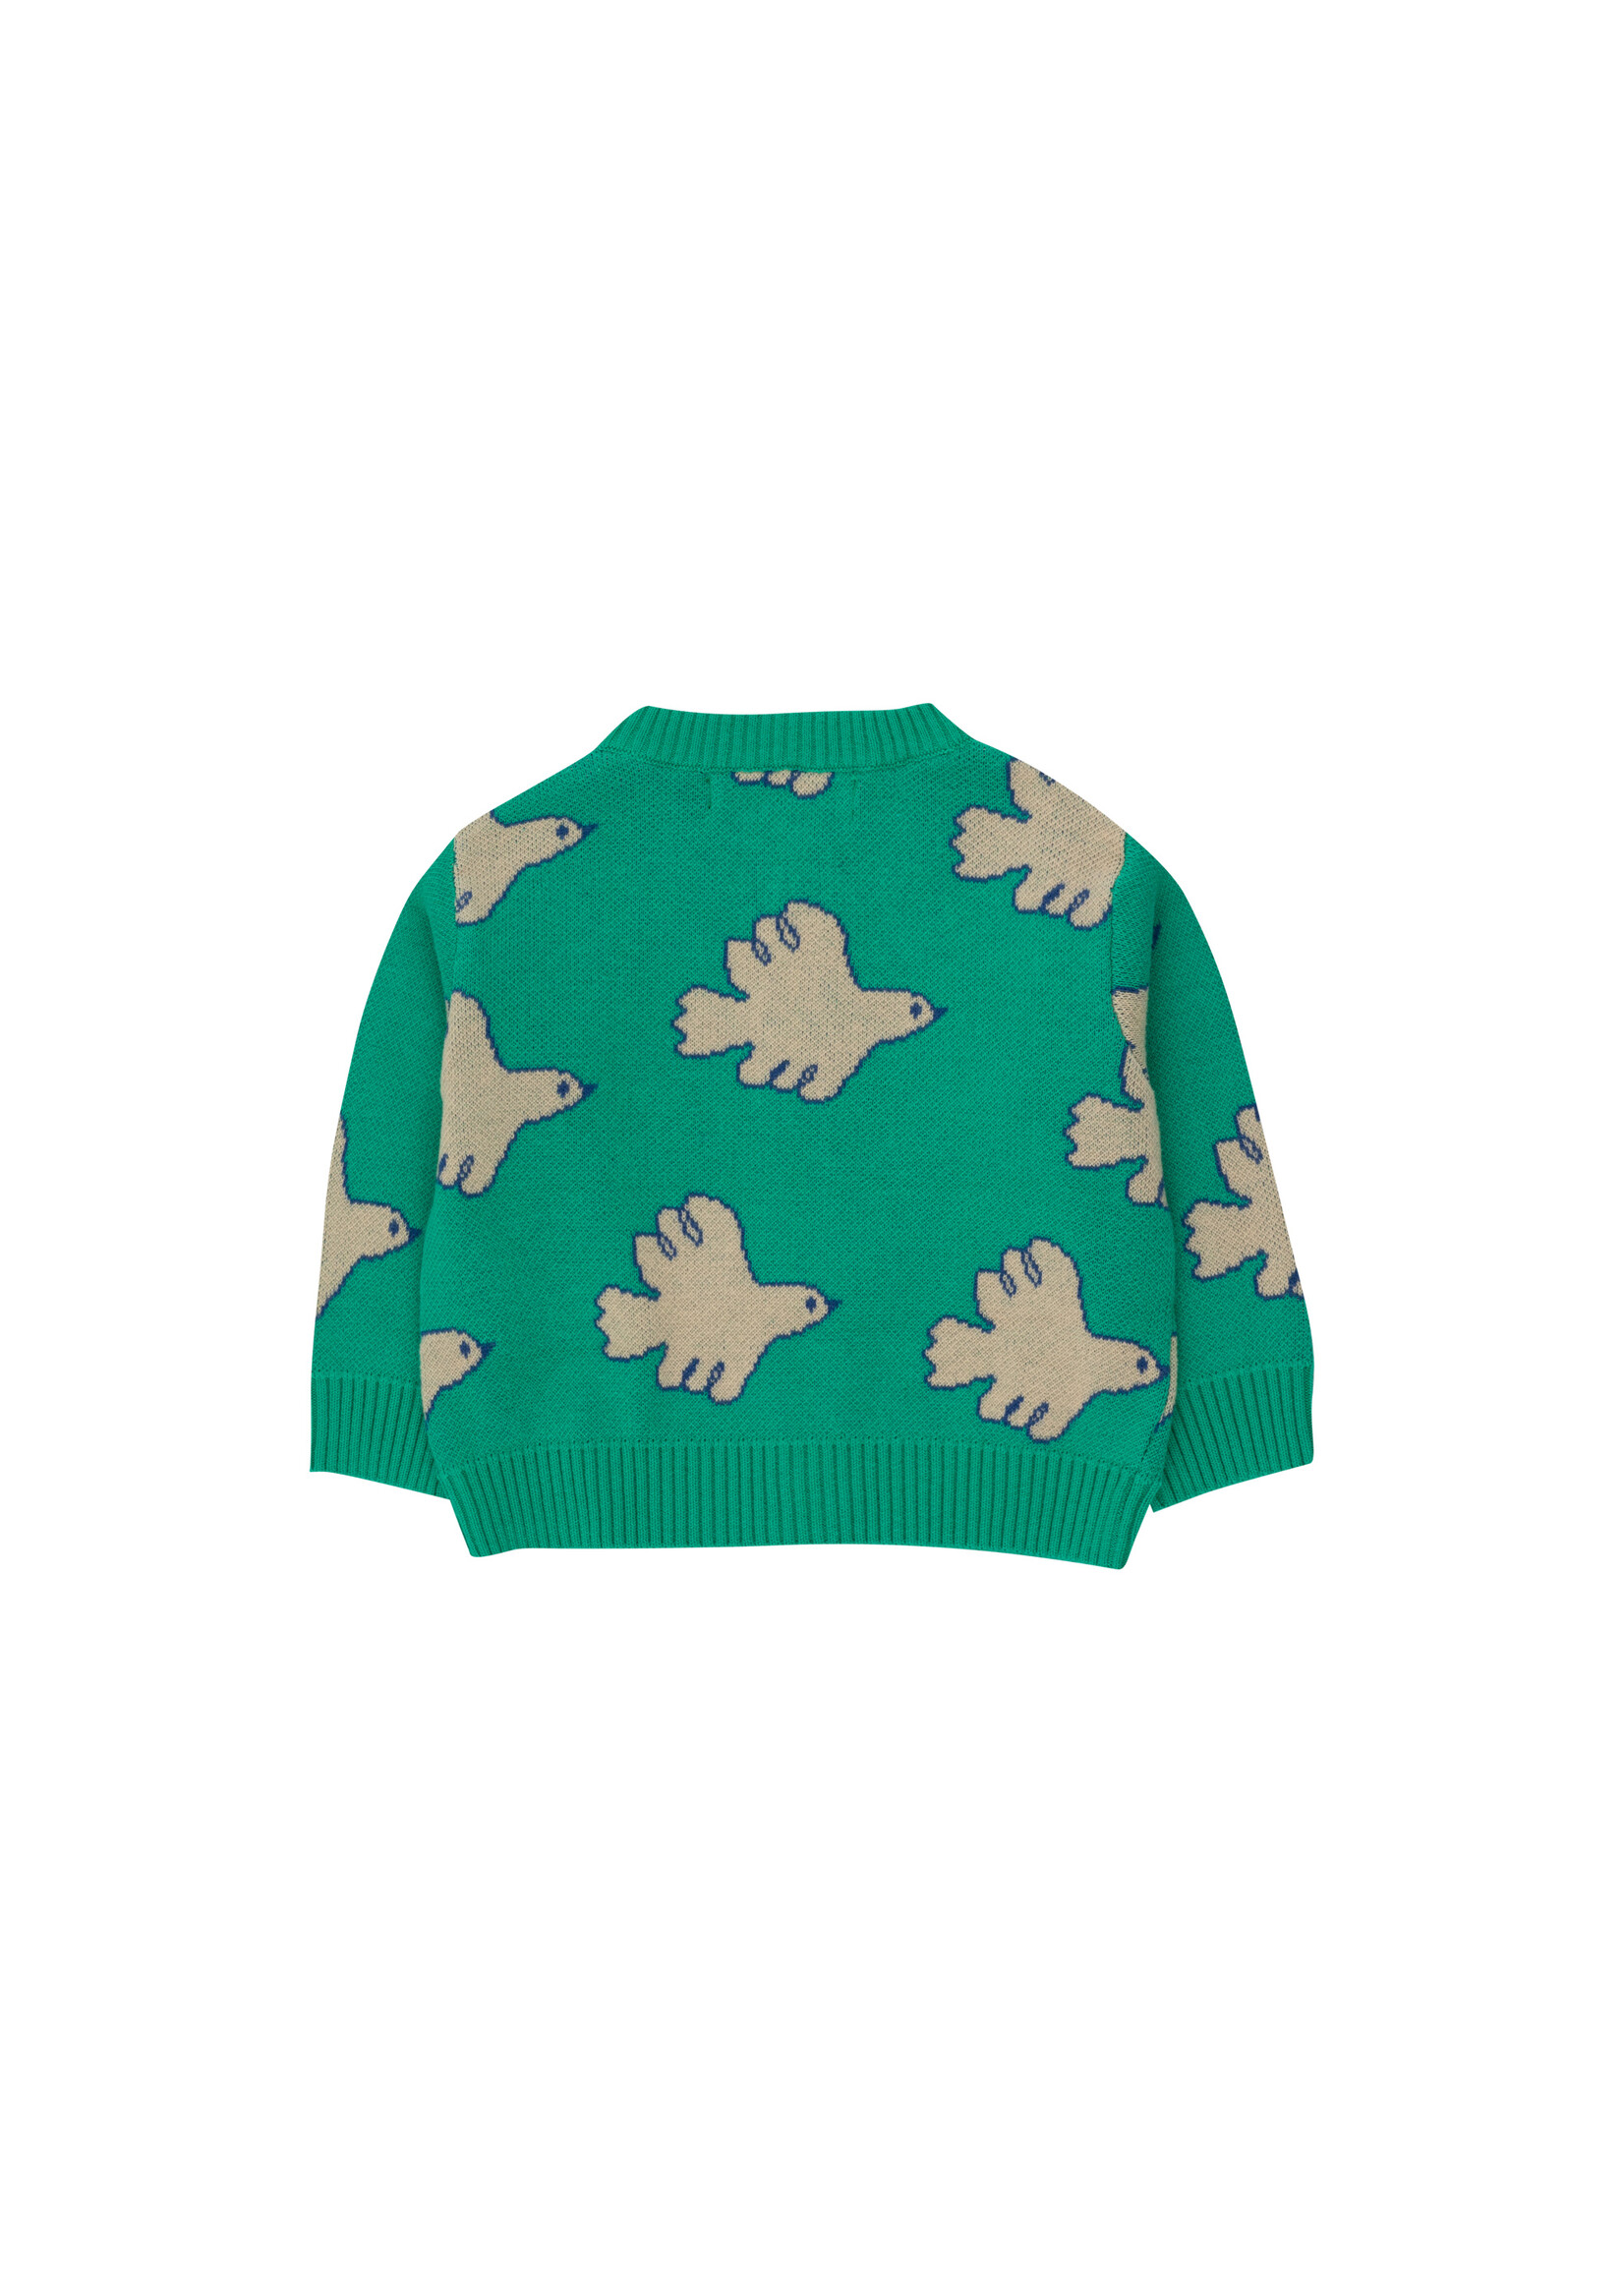 Tiny Cottons Doves baby cardigan Emerald - Tiny Cottons